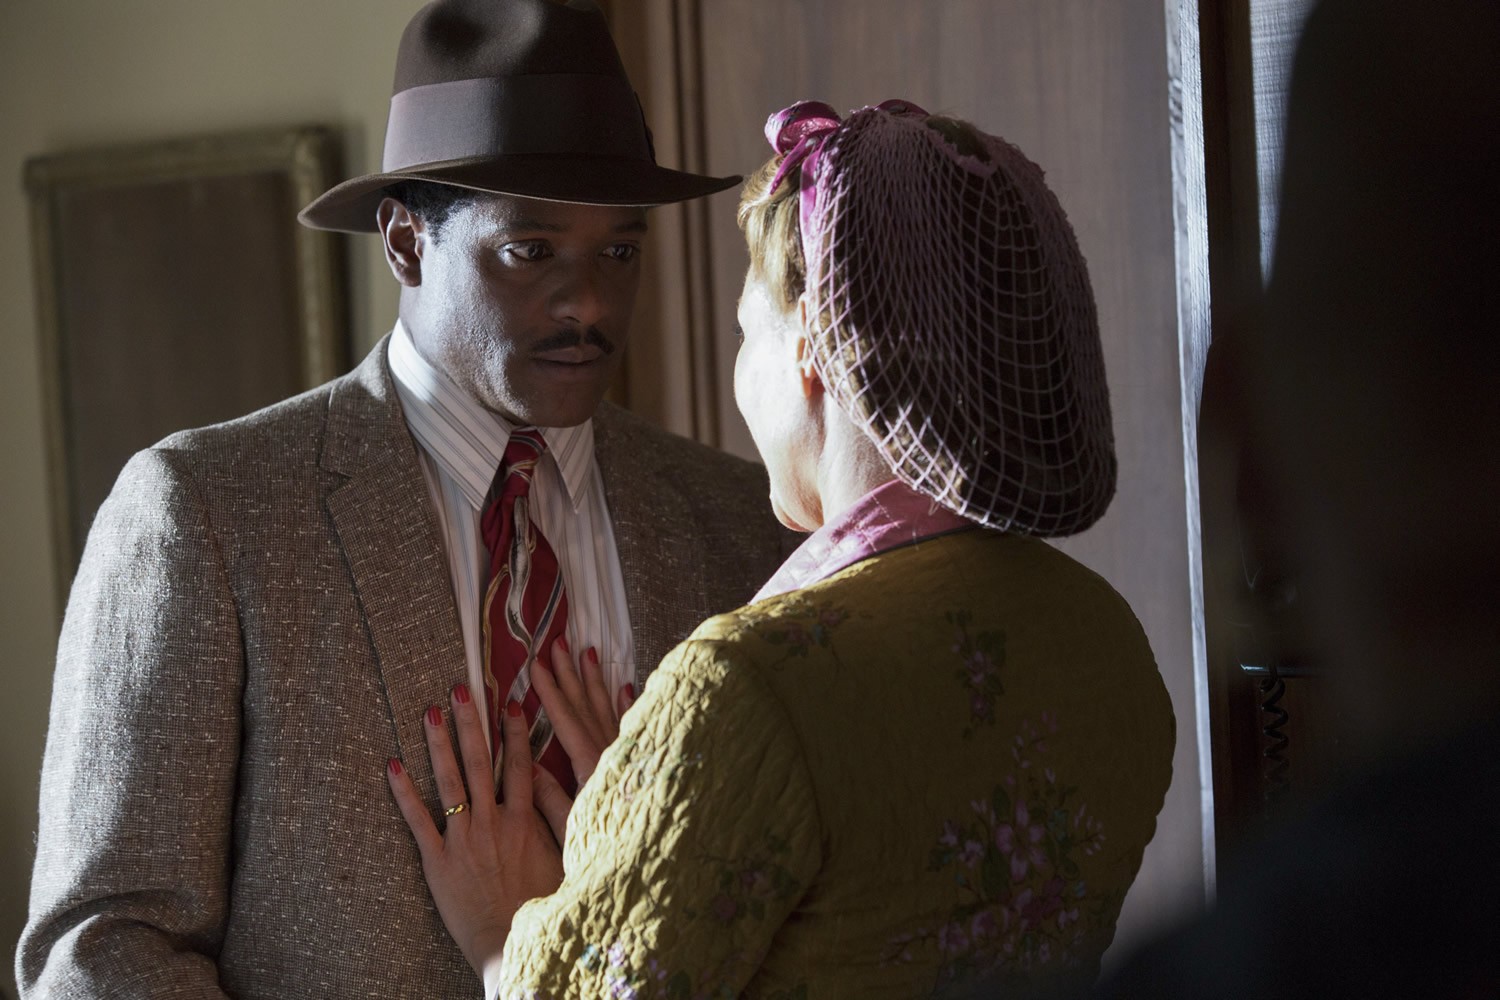 Blair Underwood stars as Ludie Watts and Vanessa Williams stars as Jessie Mae Watts in Lifetime's The Trip to Bountiful (2014). Photo credit by Bob Mahoney.